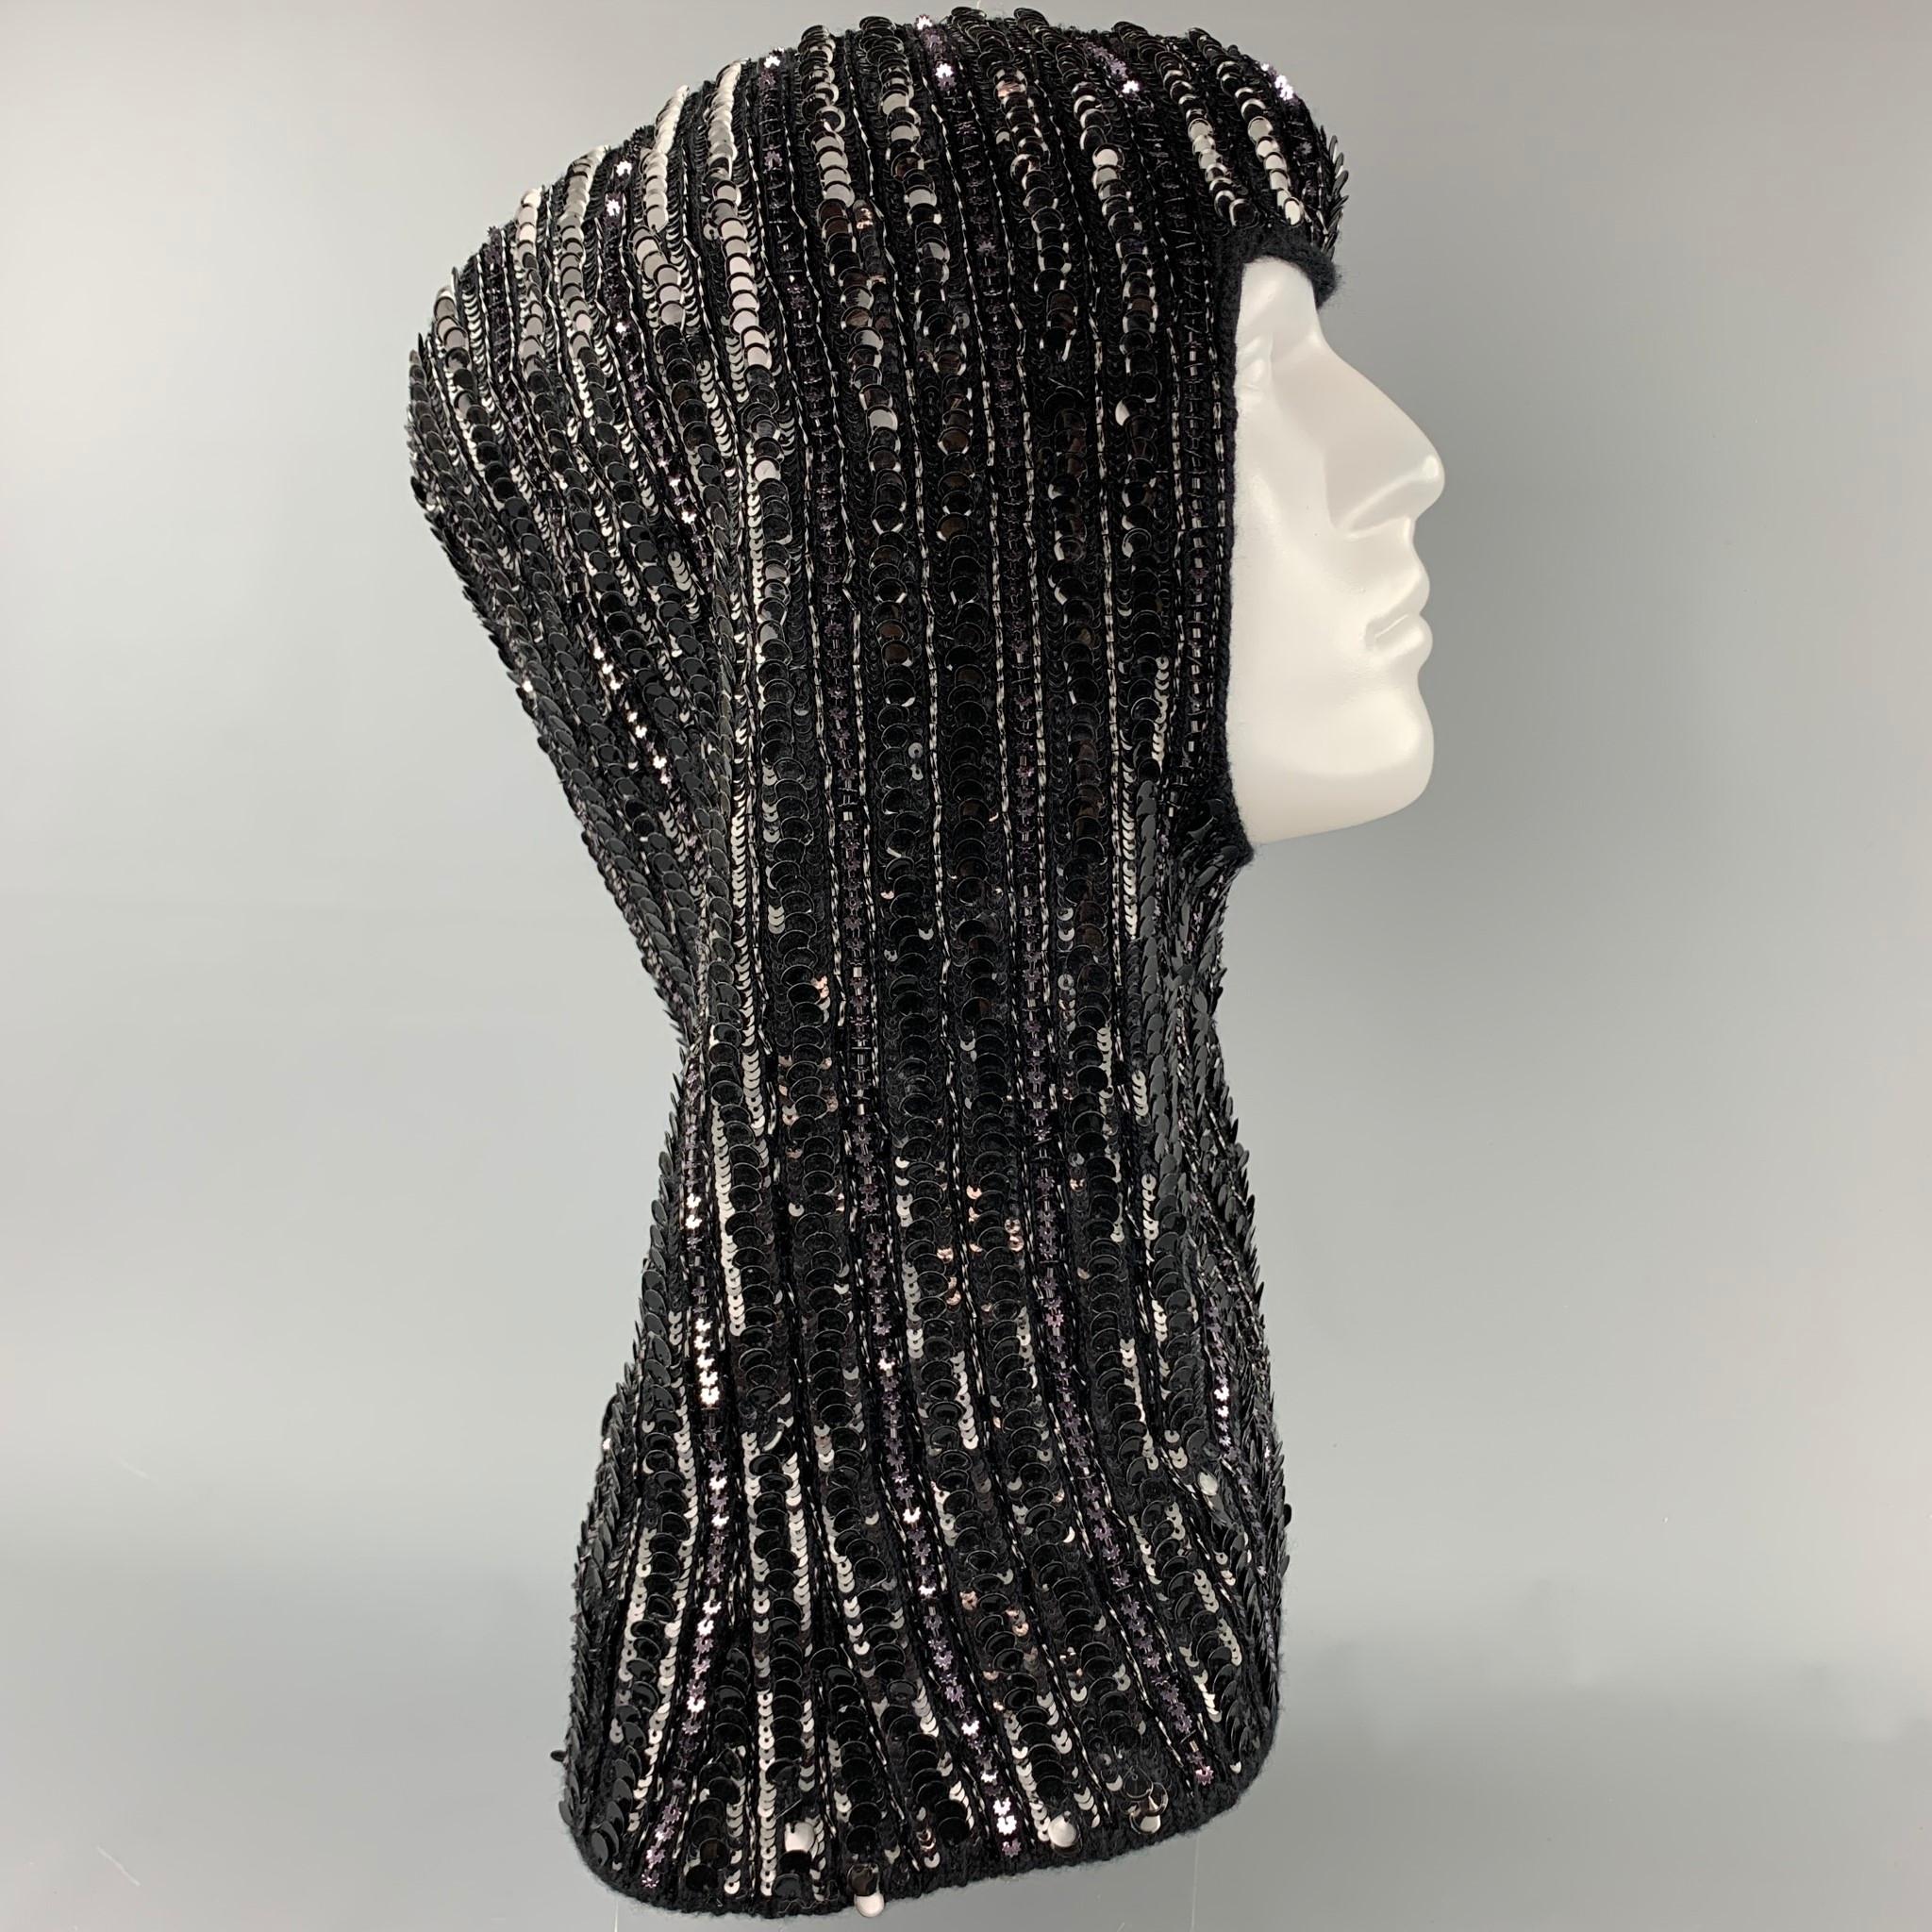 DOLCE & GABBANA hat comes in a black knitted sequin wool blend featuring a hood scarf style. Comes with box. Made in Italy.

New With Tags. 
Marked: PZ
Original Retail Price: $2,055.00

Measurements:

Length: 19.5 in.
Width: 15.5 in.
Opening: 12 in.